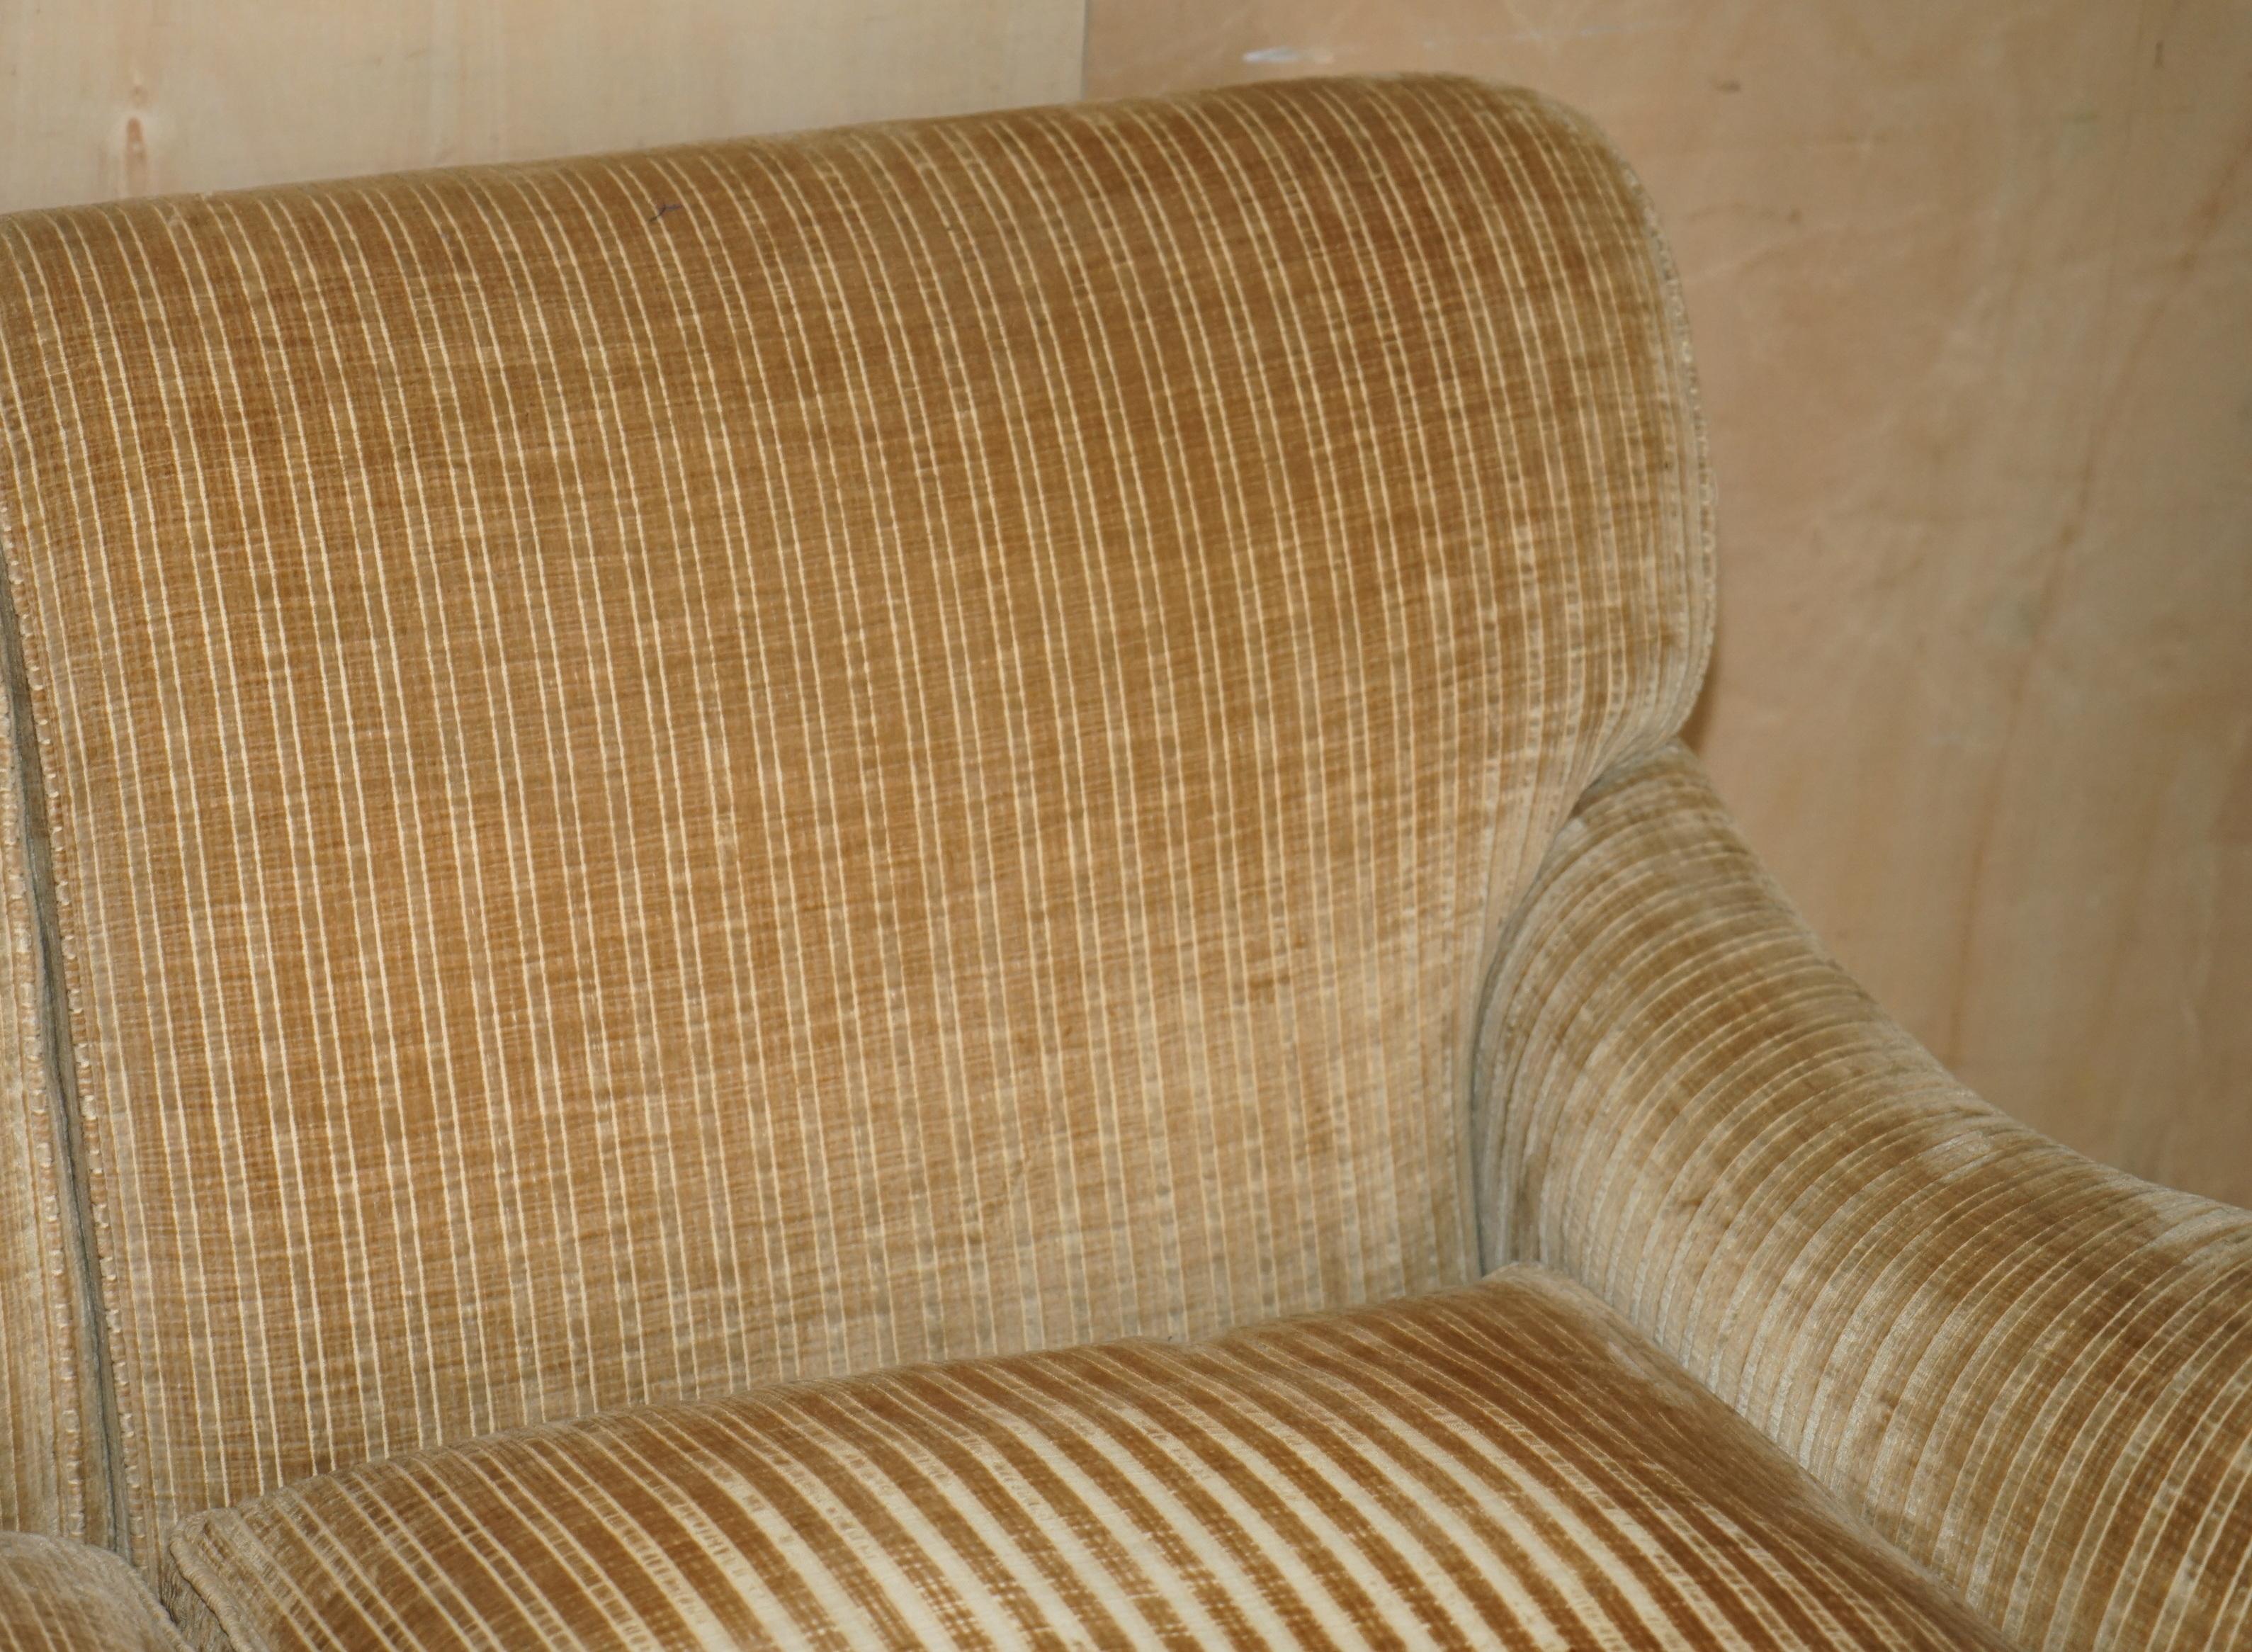 English LOVELY HOWARD & SON'S / CHAIRS LTD TWO SEAT SOFA FEATHER FILLED SEAT CUSHIONs For Sale